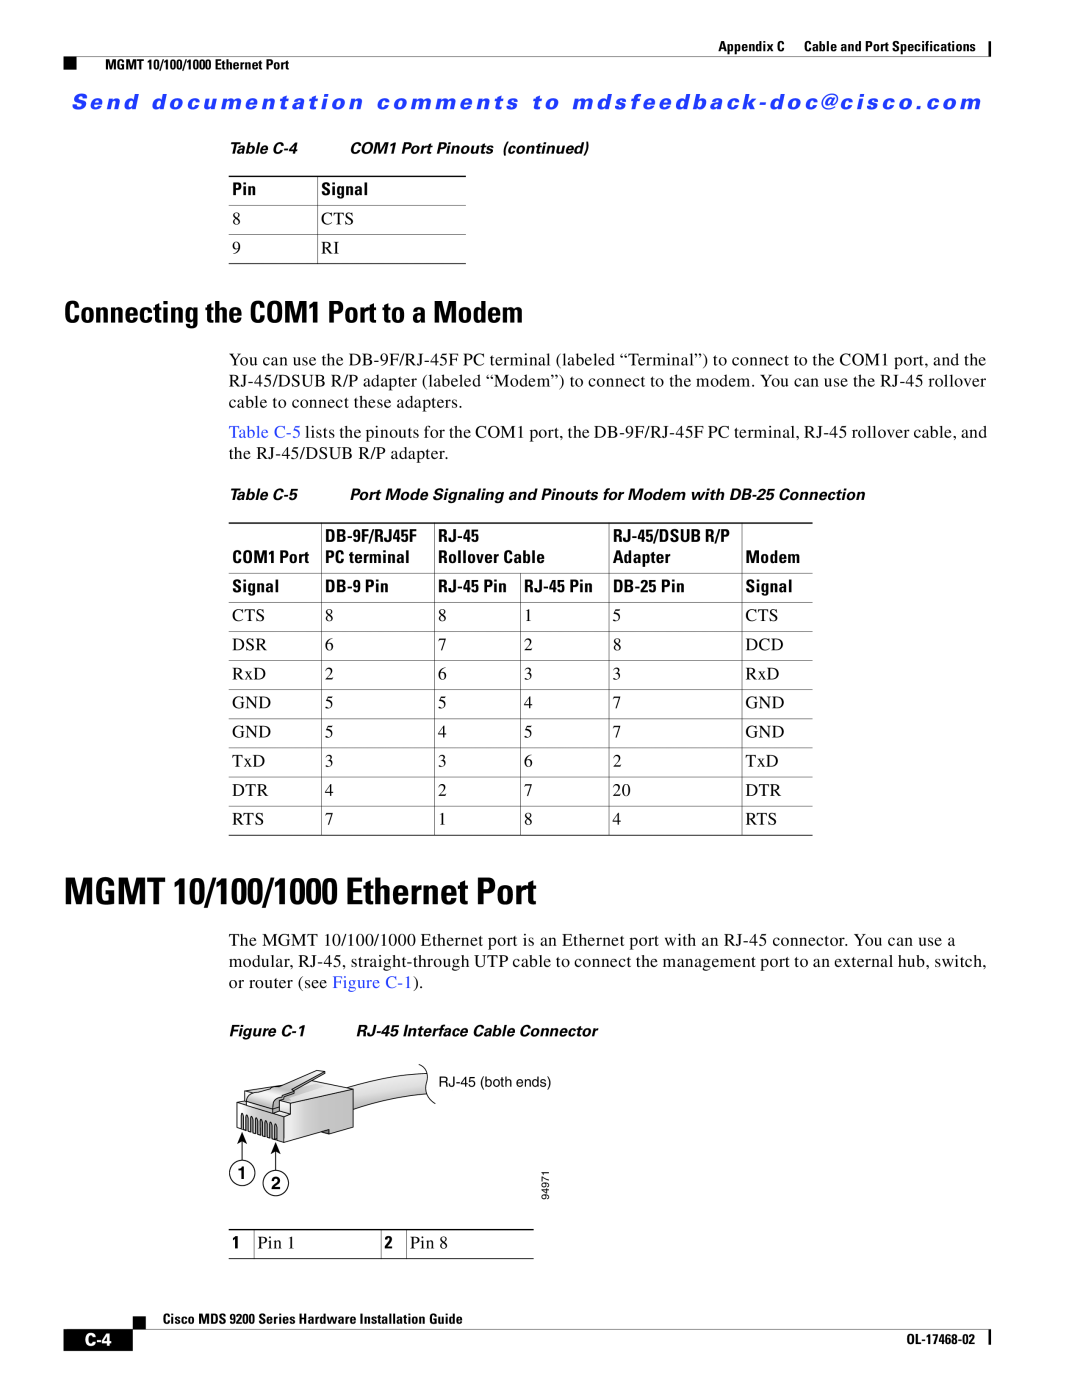 Cisco Systems MDS 9200 Series manual MGMT 10/100/1000 Ethernet Port, Connecting the COM1 Port to a Modem 